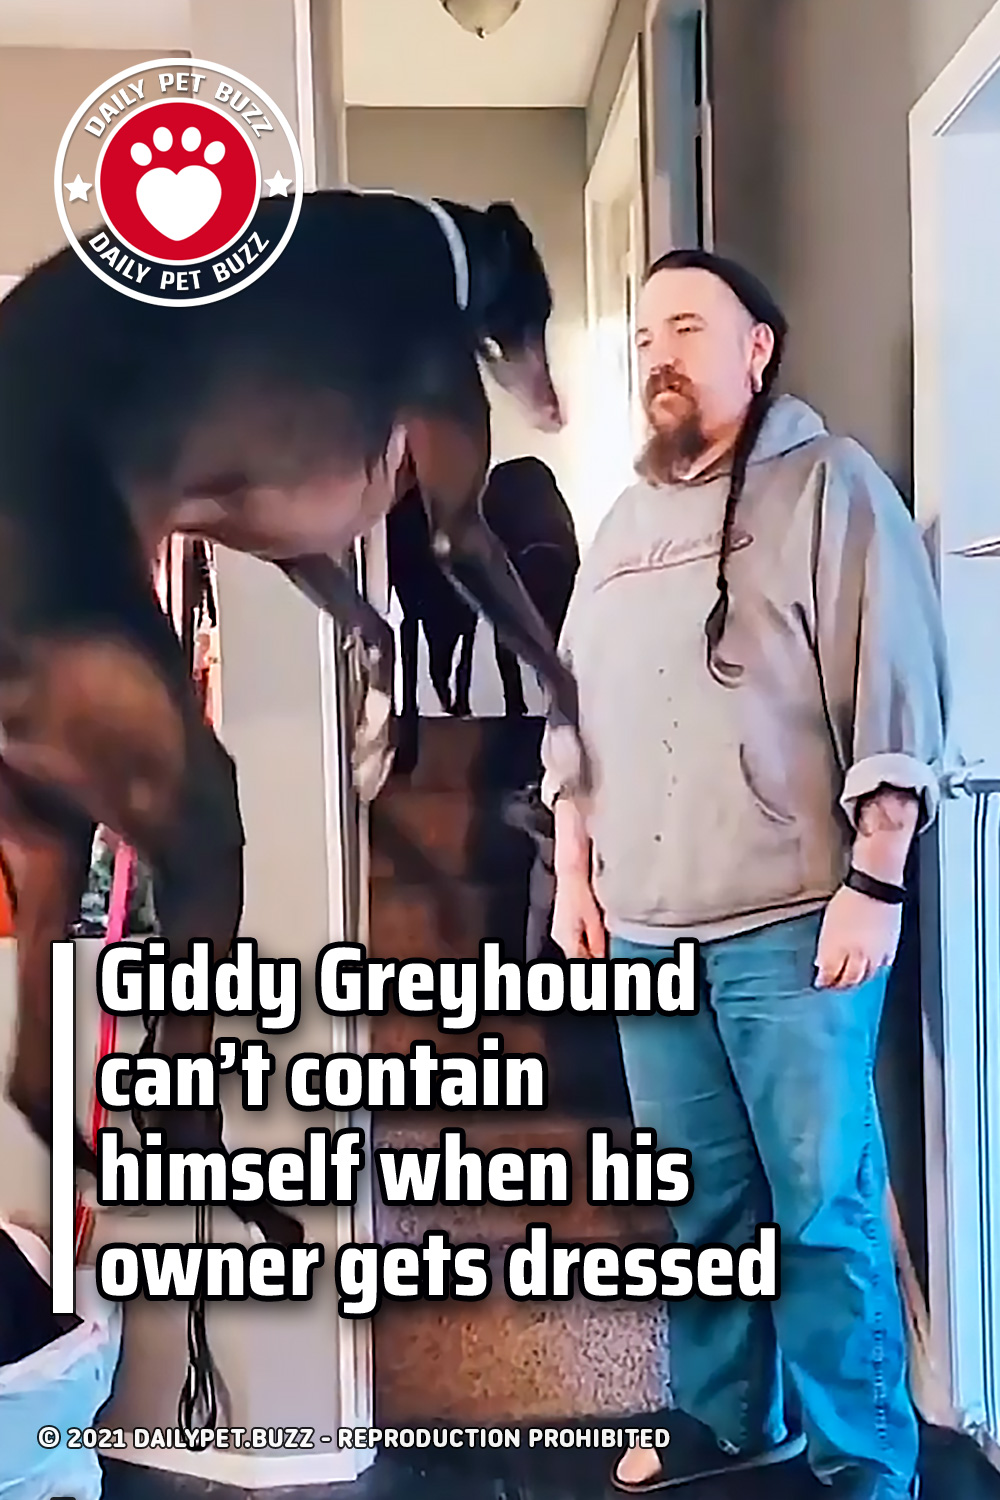 Giddy Greyhound can’t contain himself when his owner gets dressed